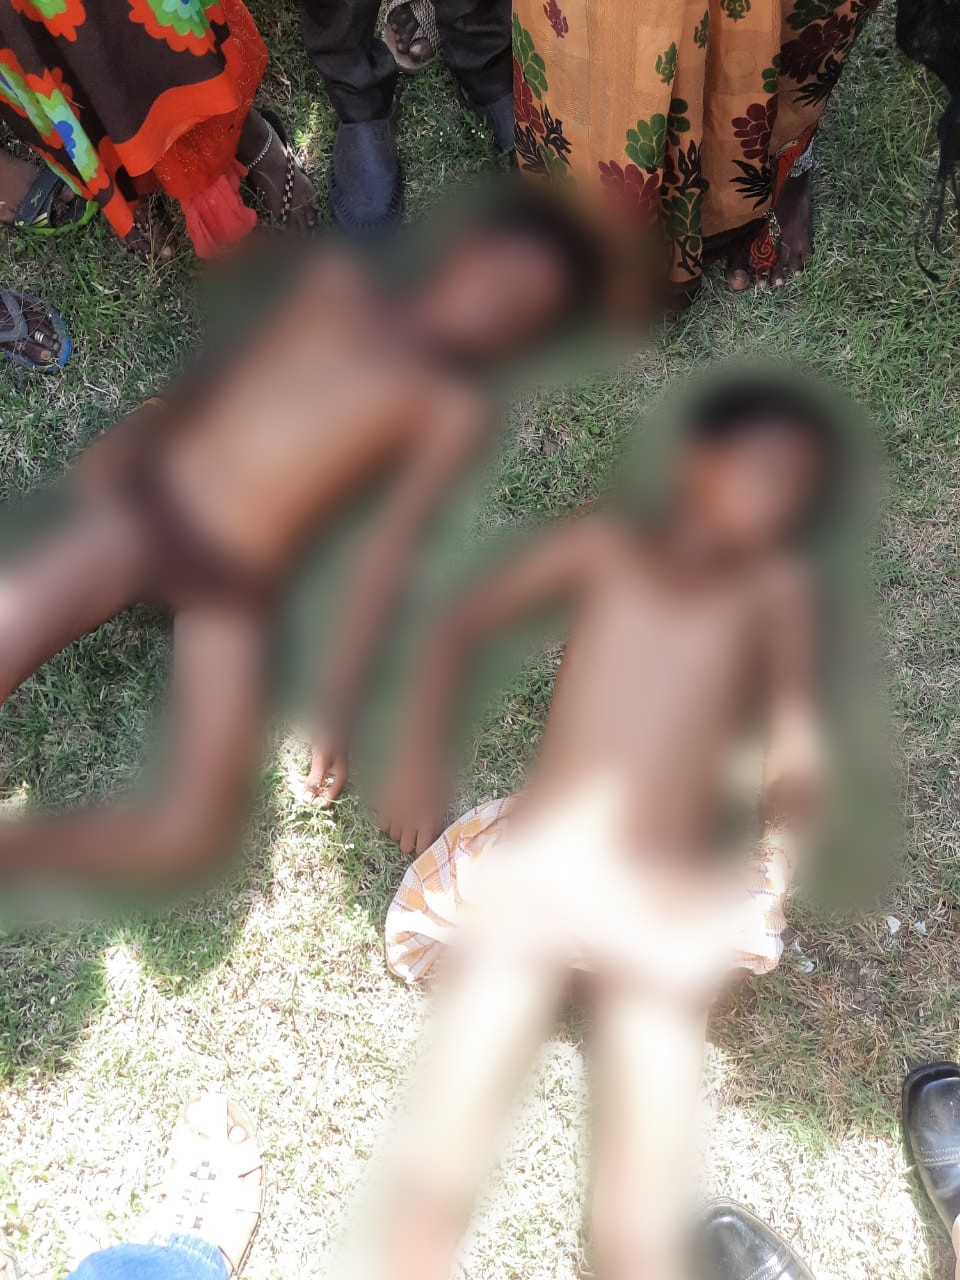 two-boys-died-after-falling-in-river-at-bagalkot